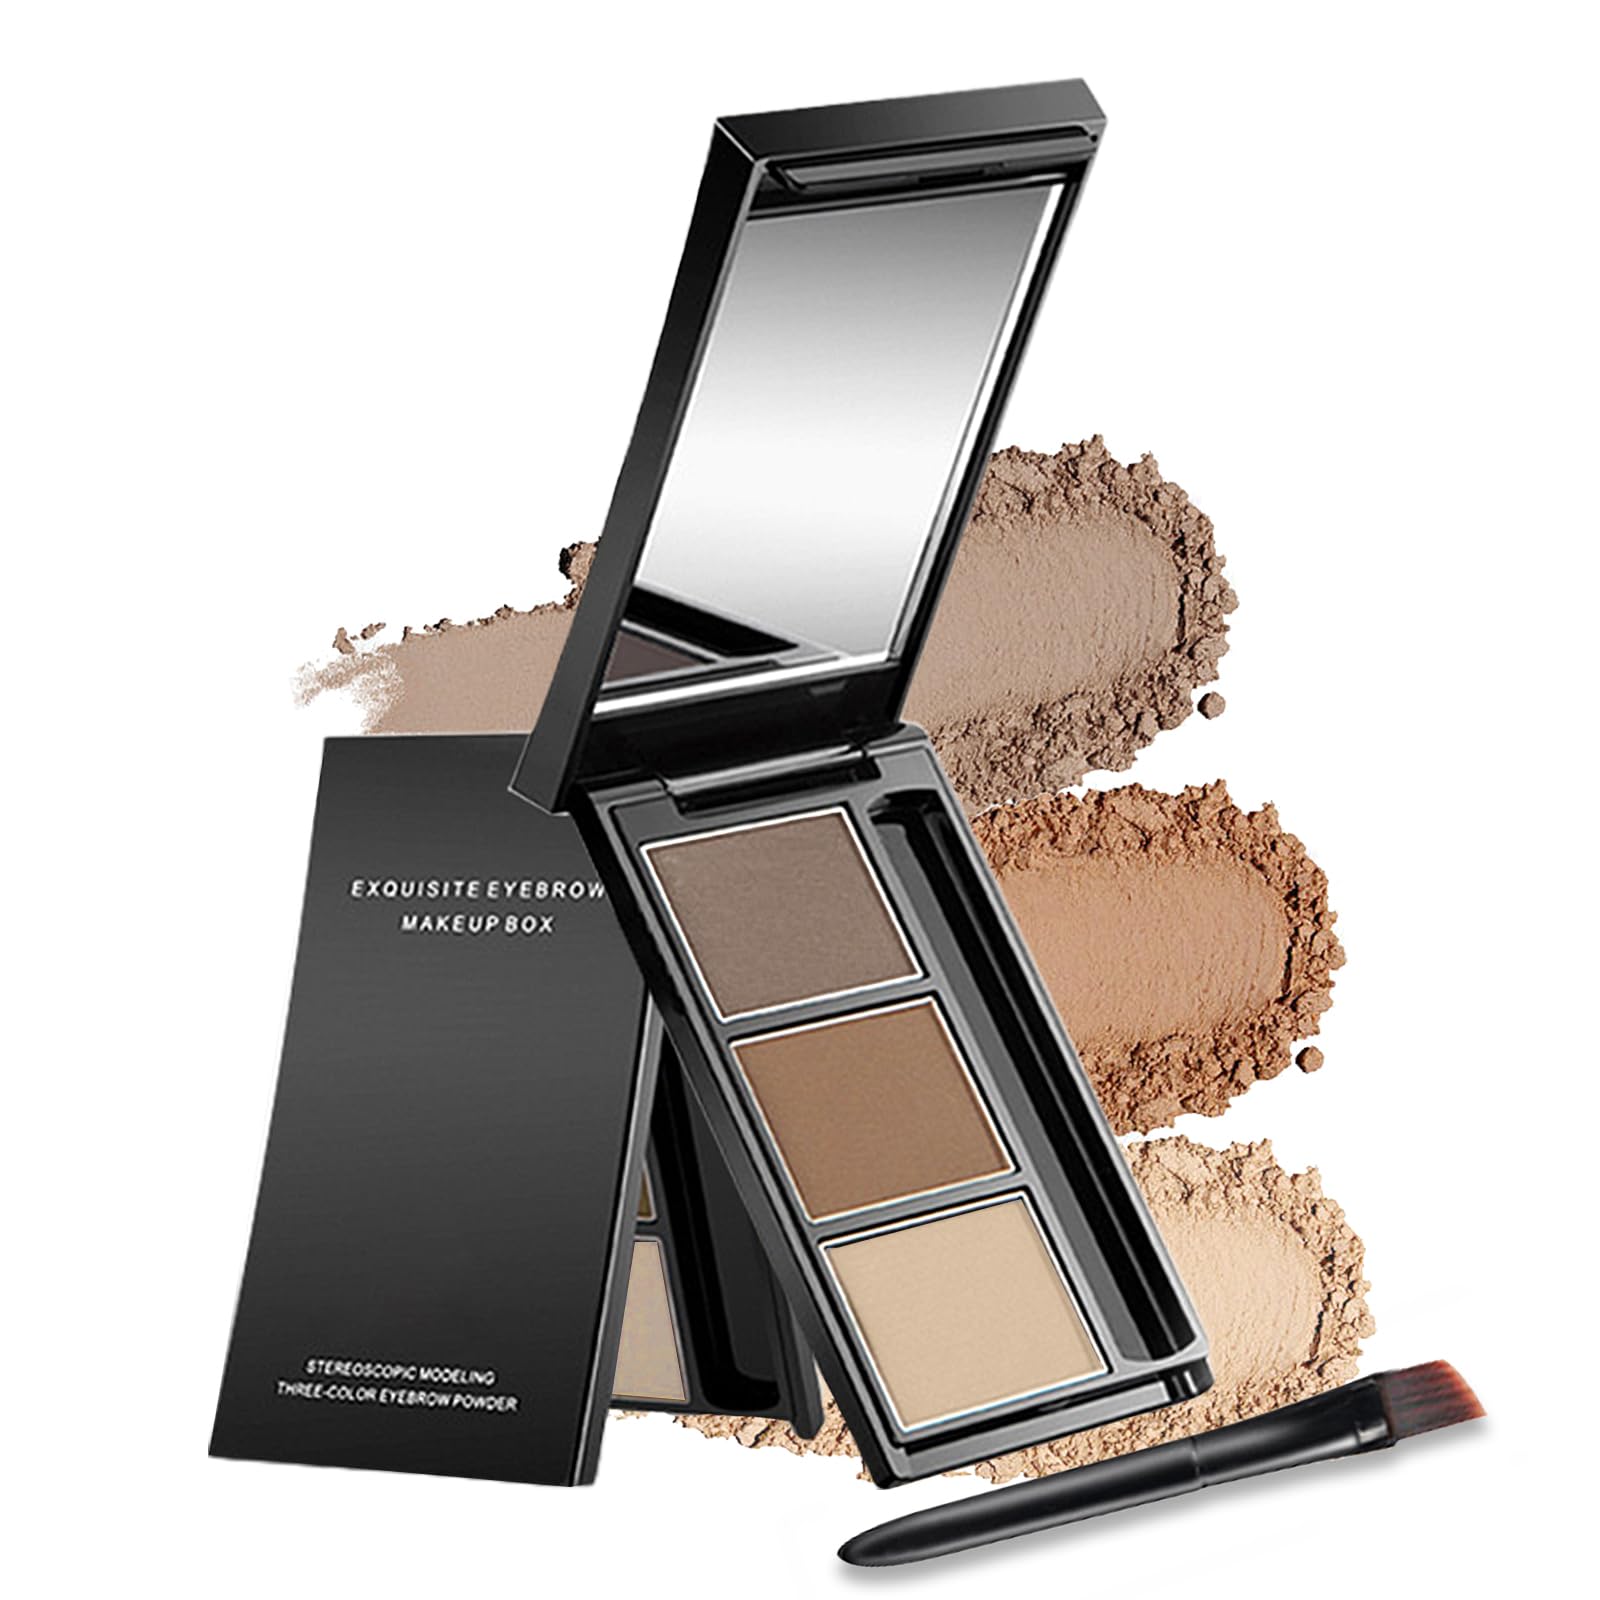 15 Best Eyebrow Makeup Products for 2021 - Eyebrow Powder & Palettes